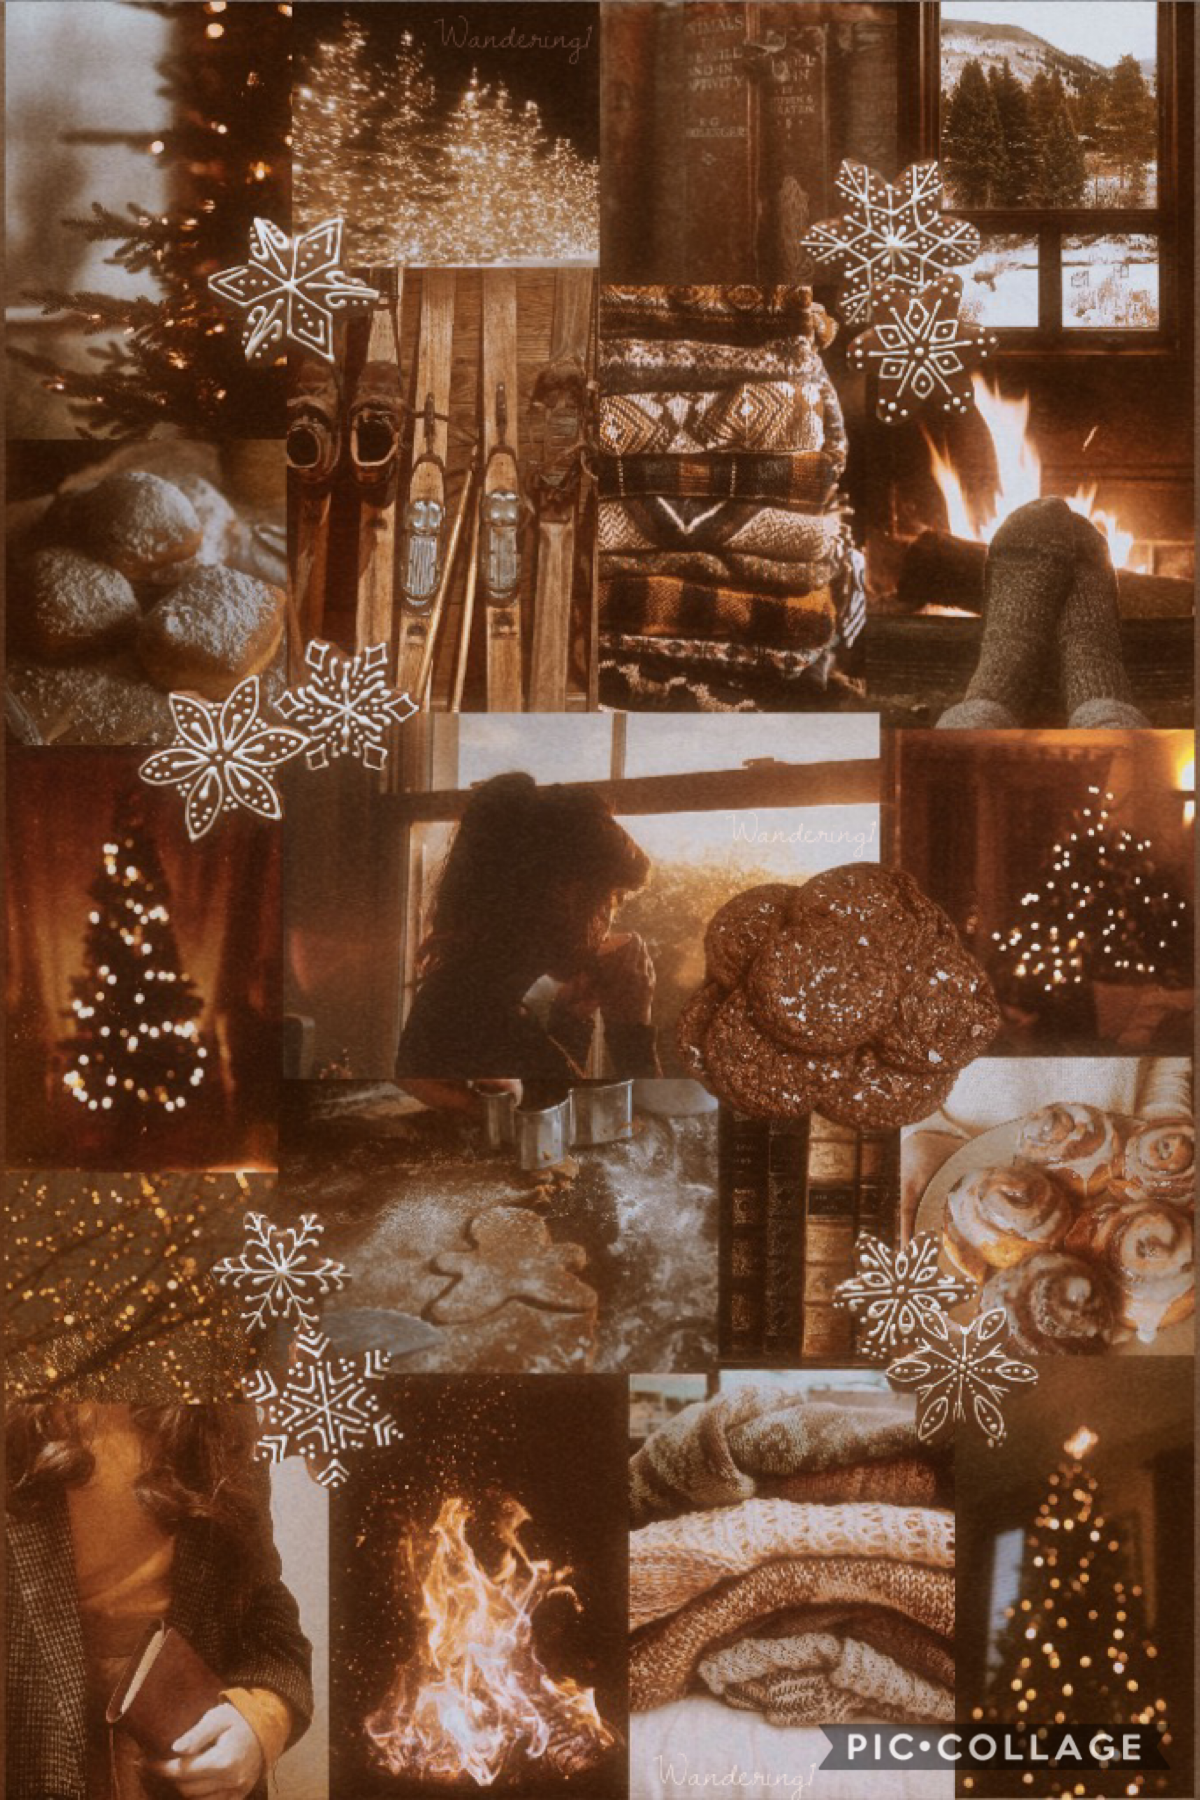 ❄️25 days of Christmas❄️
Day 16: okay actually this one is definitely one of my favorite collages  😂
✨9 more days of Christmas✨